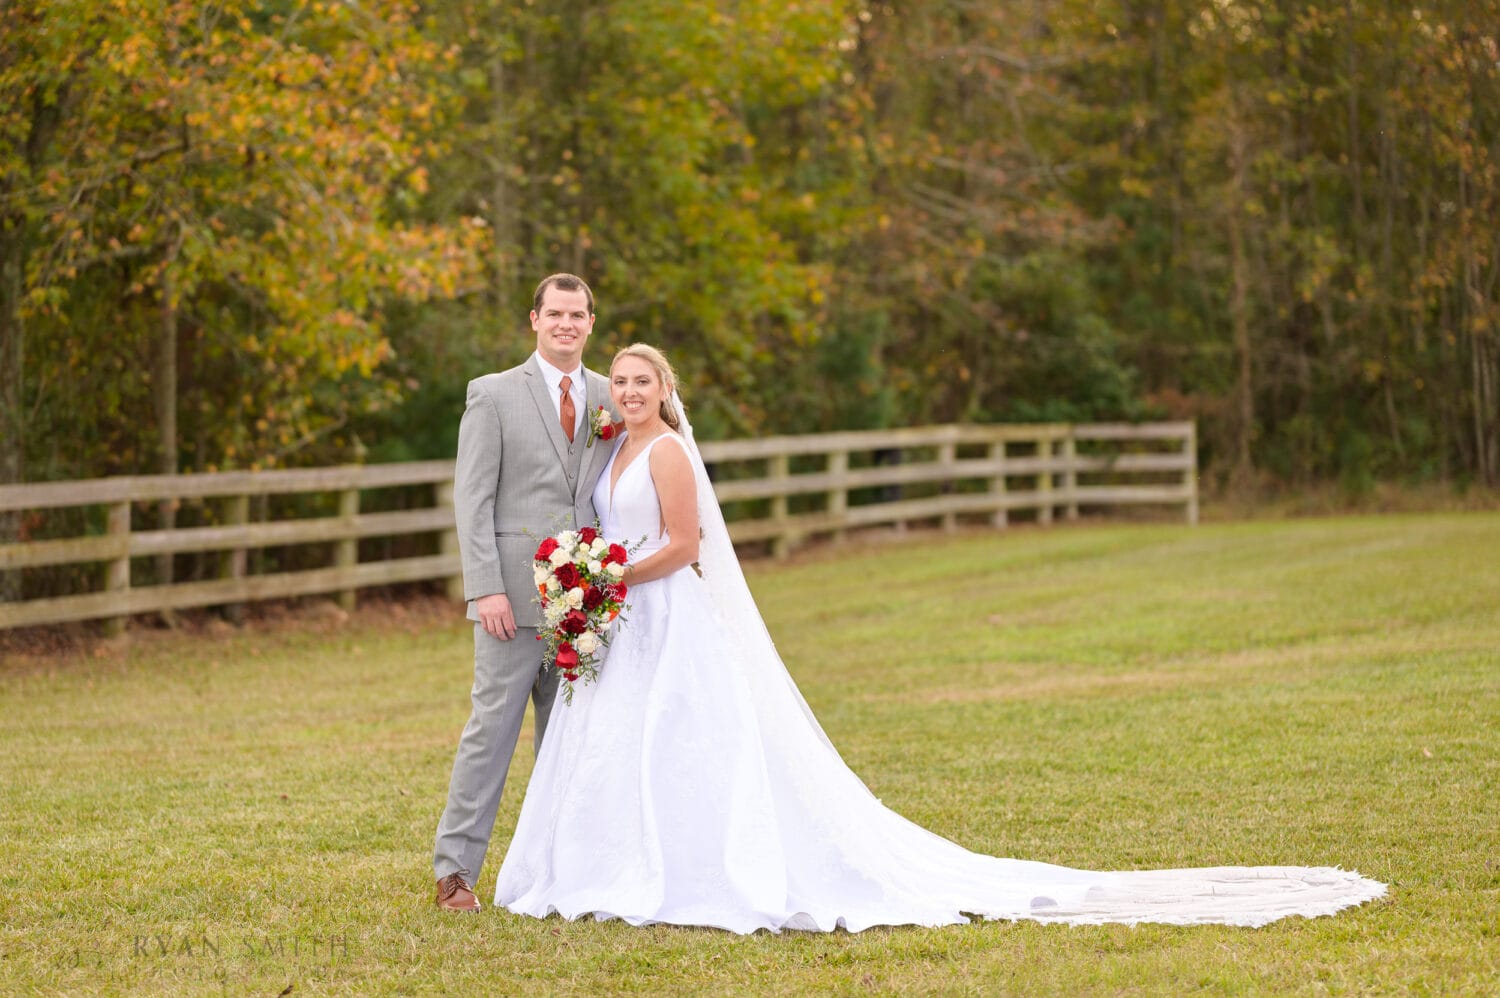 Bride and groom portraits by the fence - The Blessed Barn